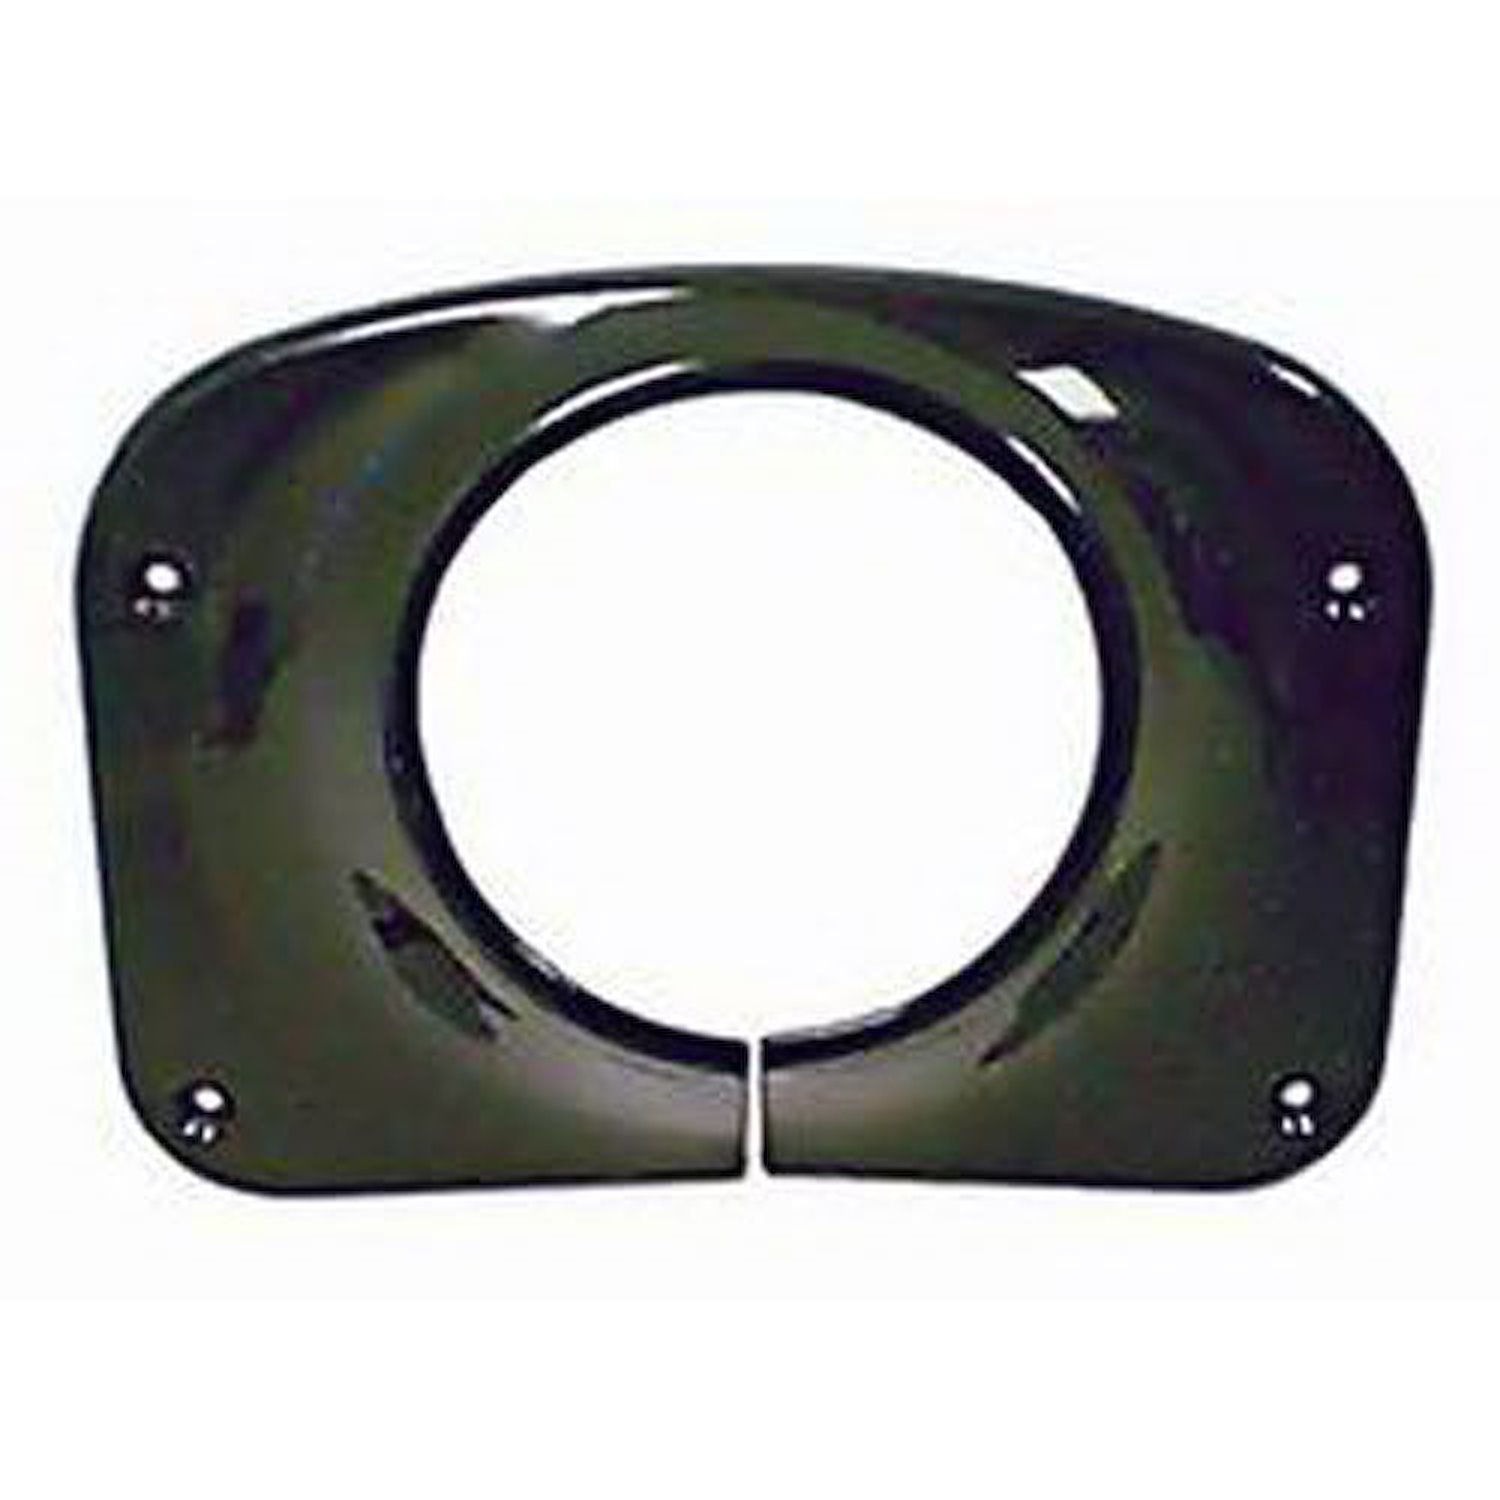 This black steering column cover from Rugged Ridge fits 76-83 CJ5 76-86 CJ7 and 81-86 CJ8.